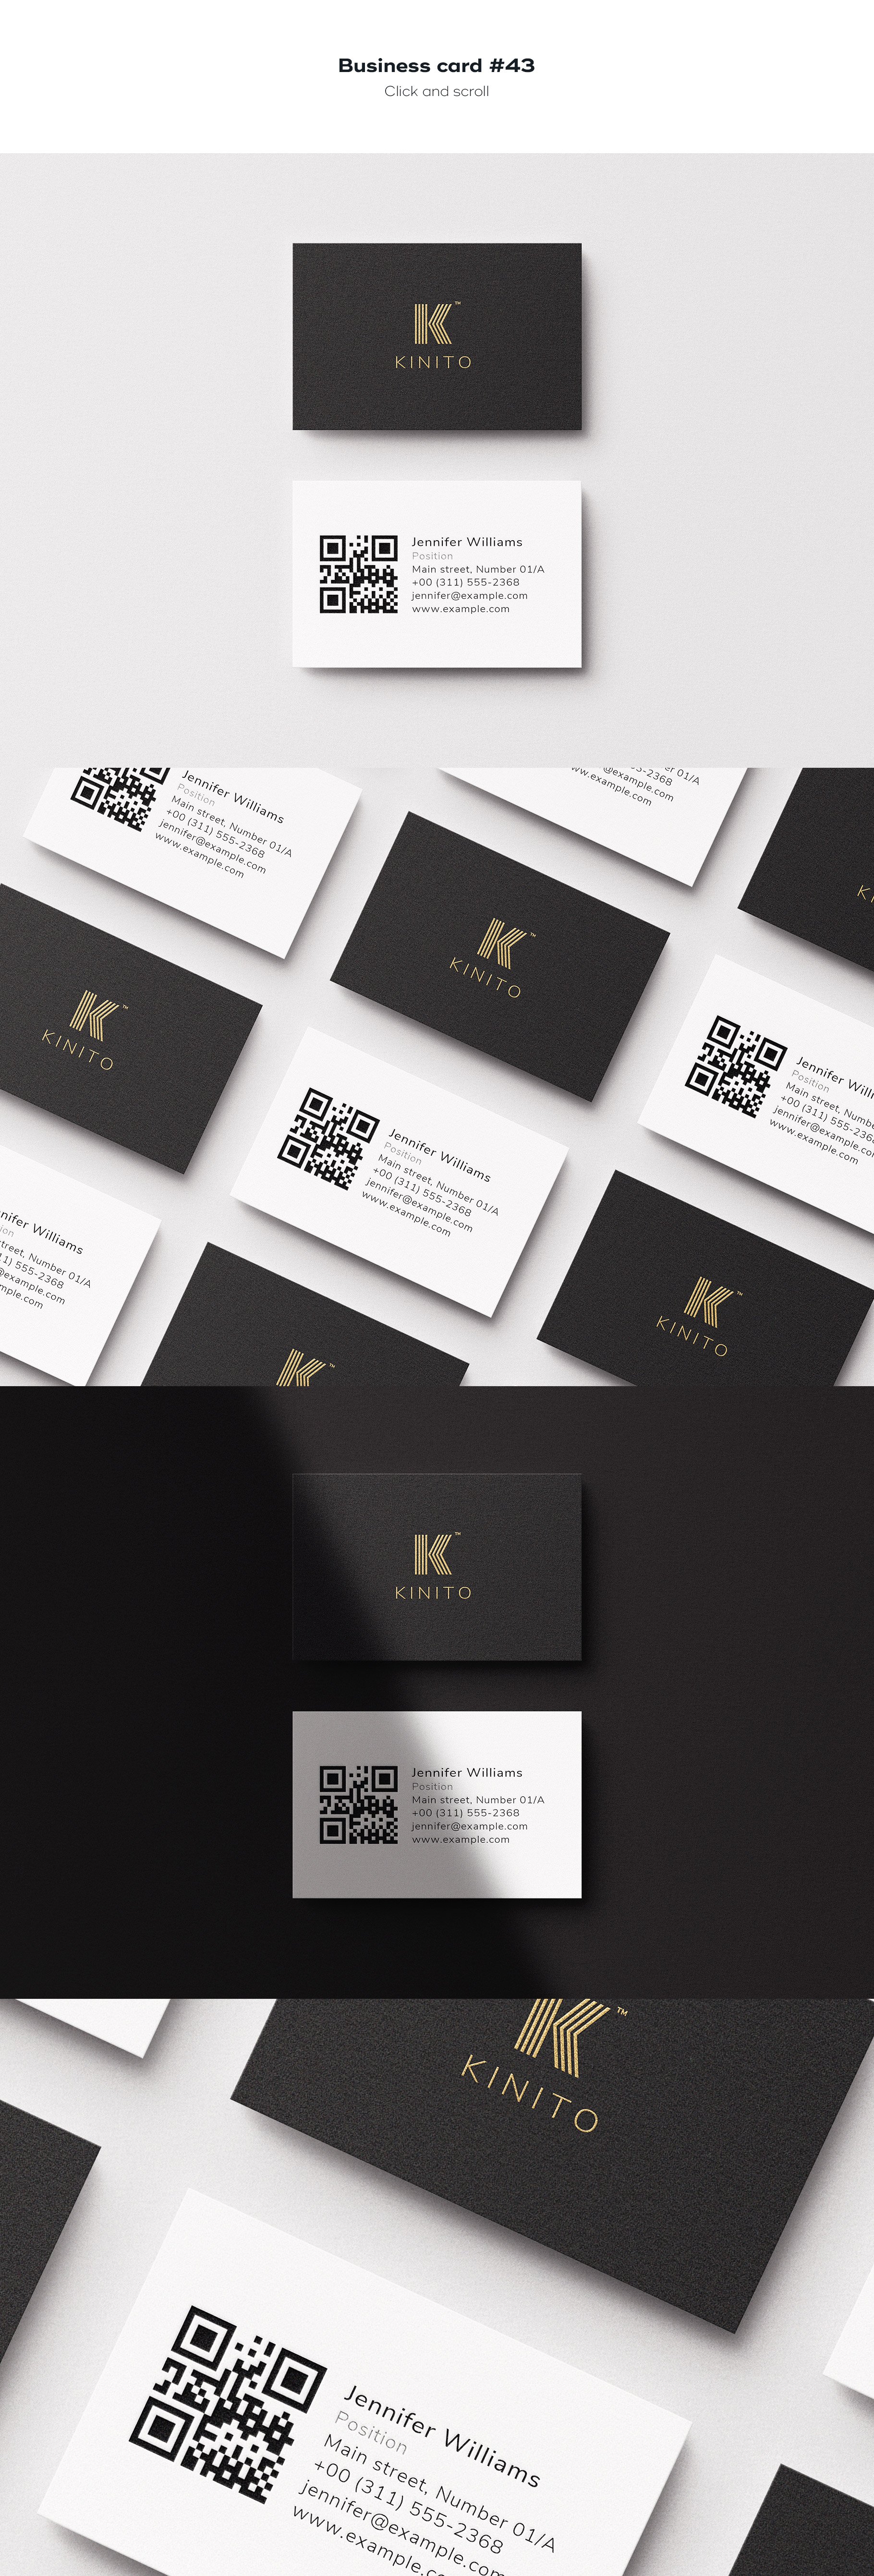 business card 43 466